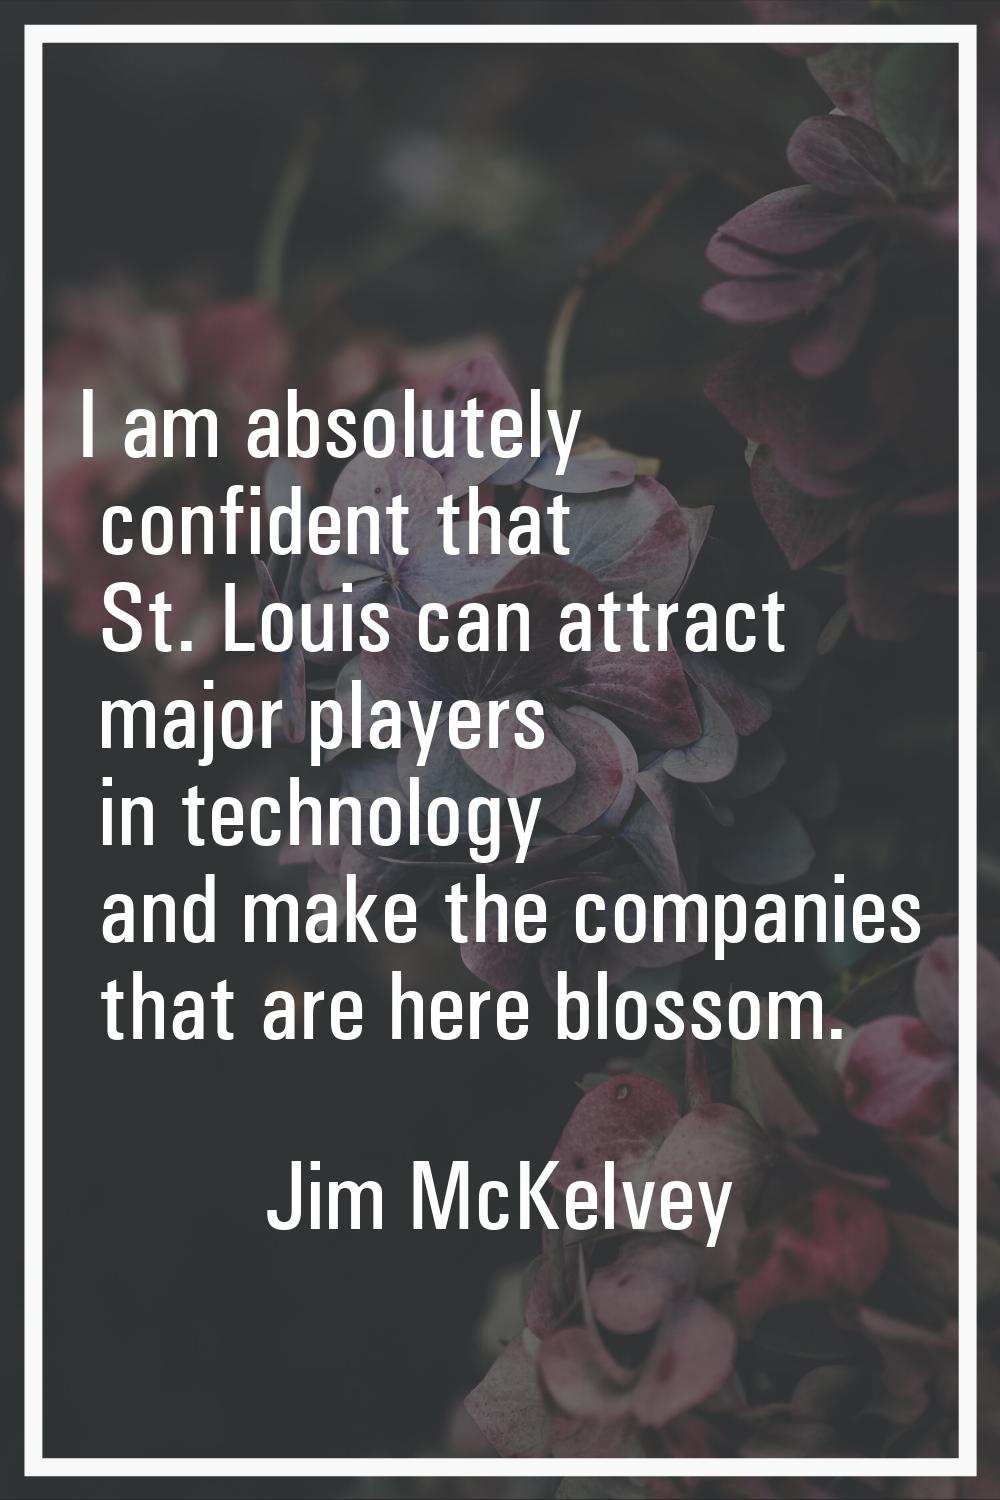 I am absolutely confident that St. Louis can attract major players in technology and make the compa